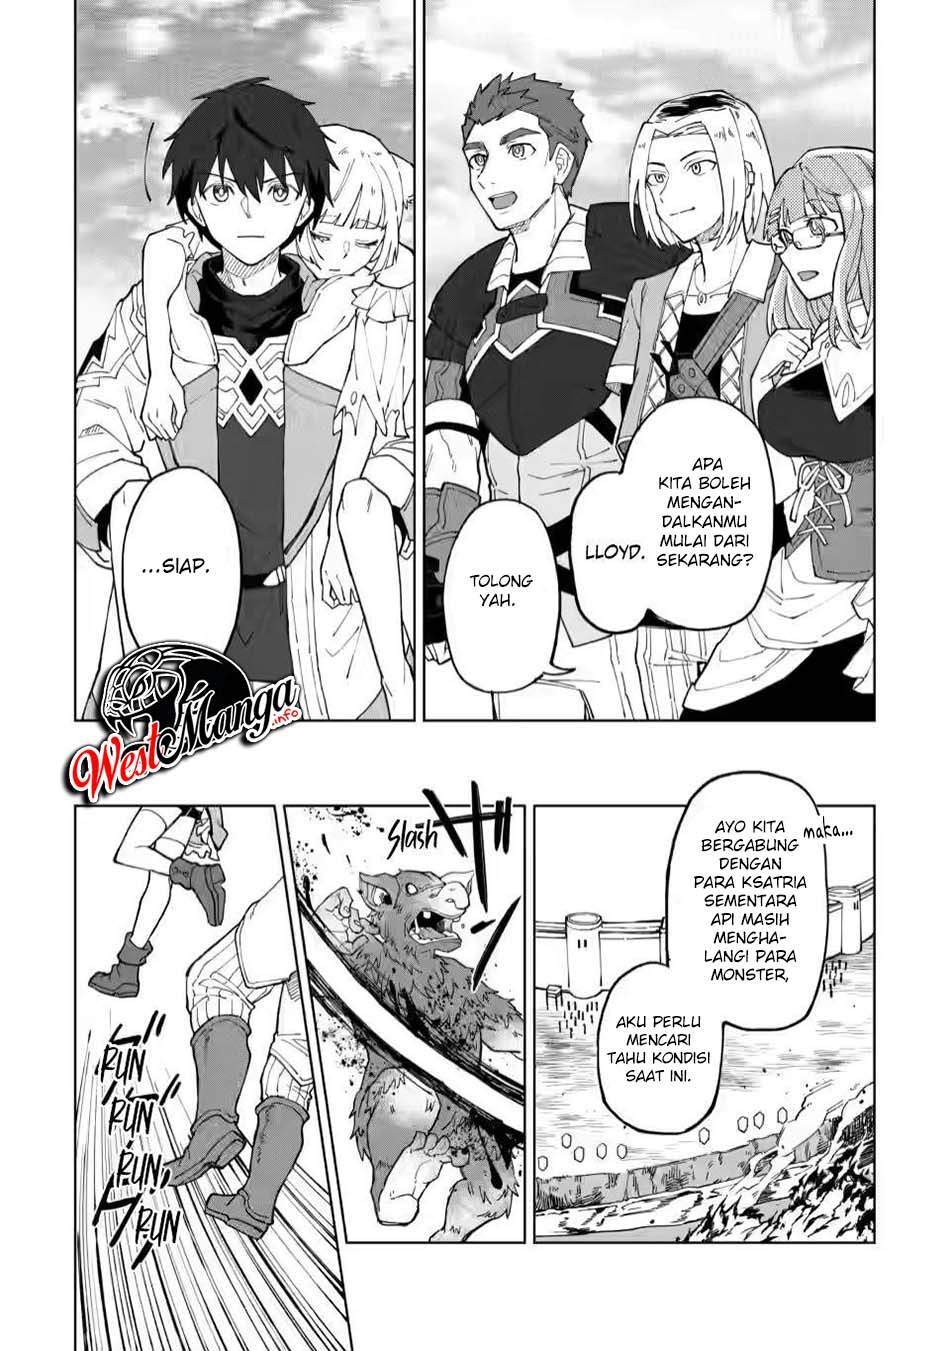 The White Mage Who Was Banished From the Hero’s Party Is Picked up by an S Rank Adventurer ~ This White Mage Is Too Out of the Ordinary! Chapter 8